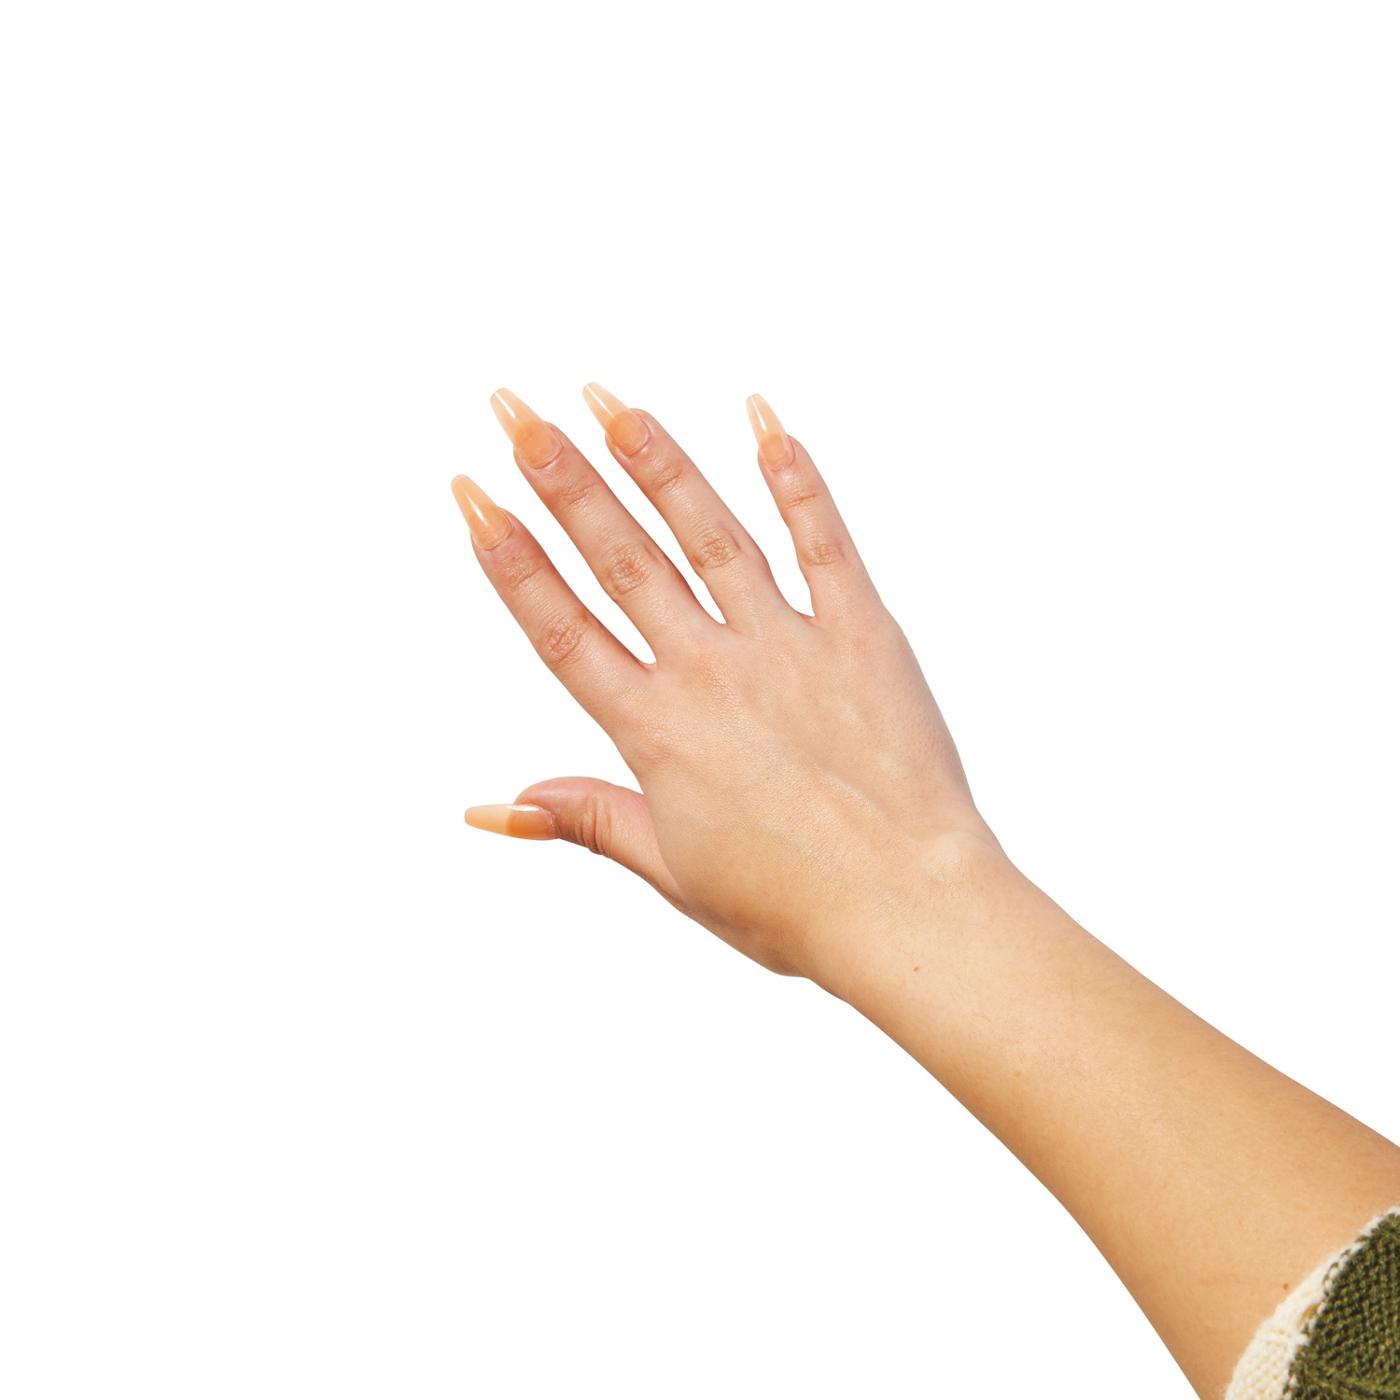 Diosa Long Coffin Artificial Nails – Truly Hue Fawn; image 7 of 7